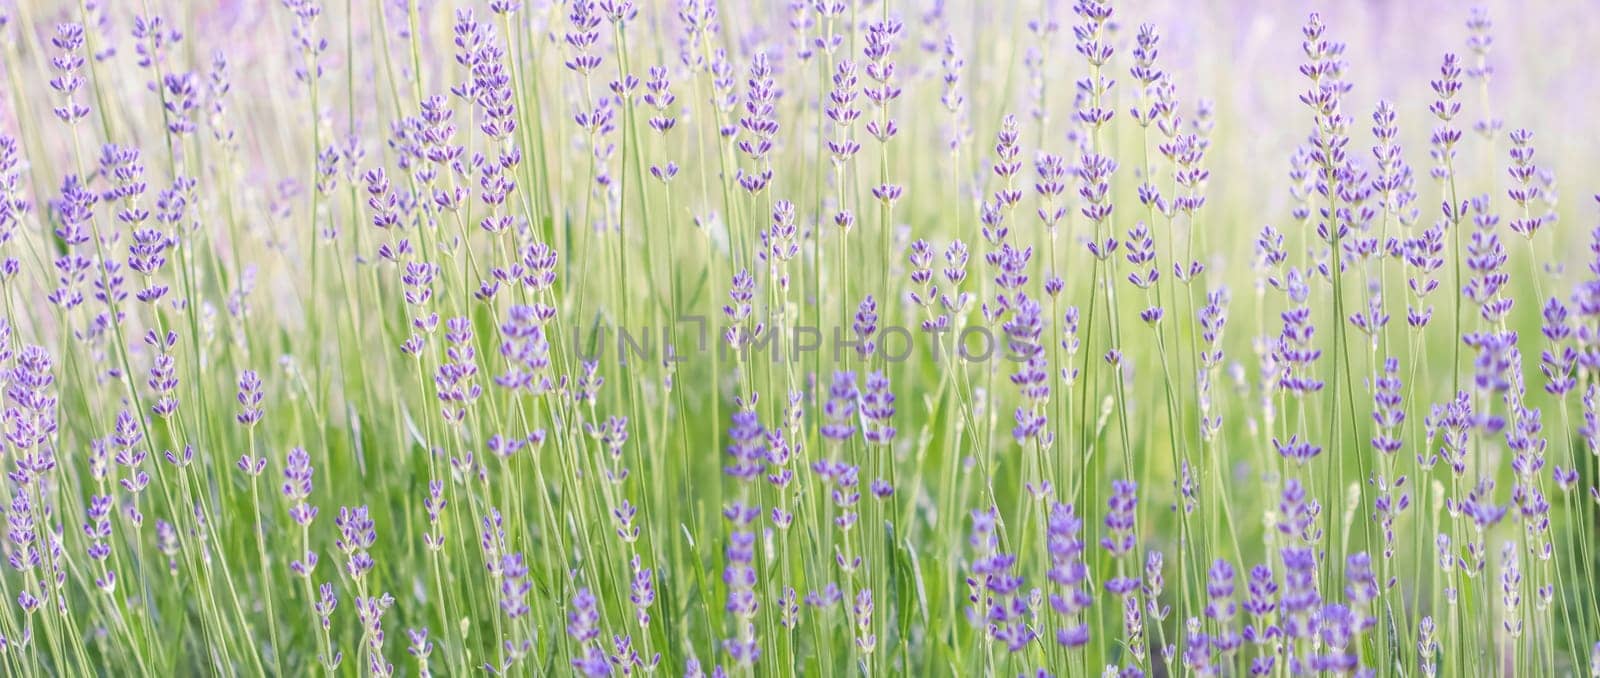 Lavender flowers blooming in the lavender field. Soft focus by Olayola